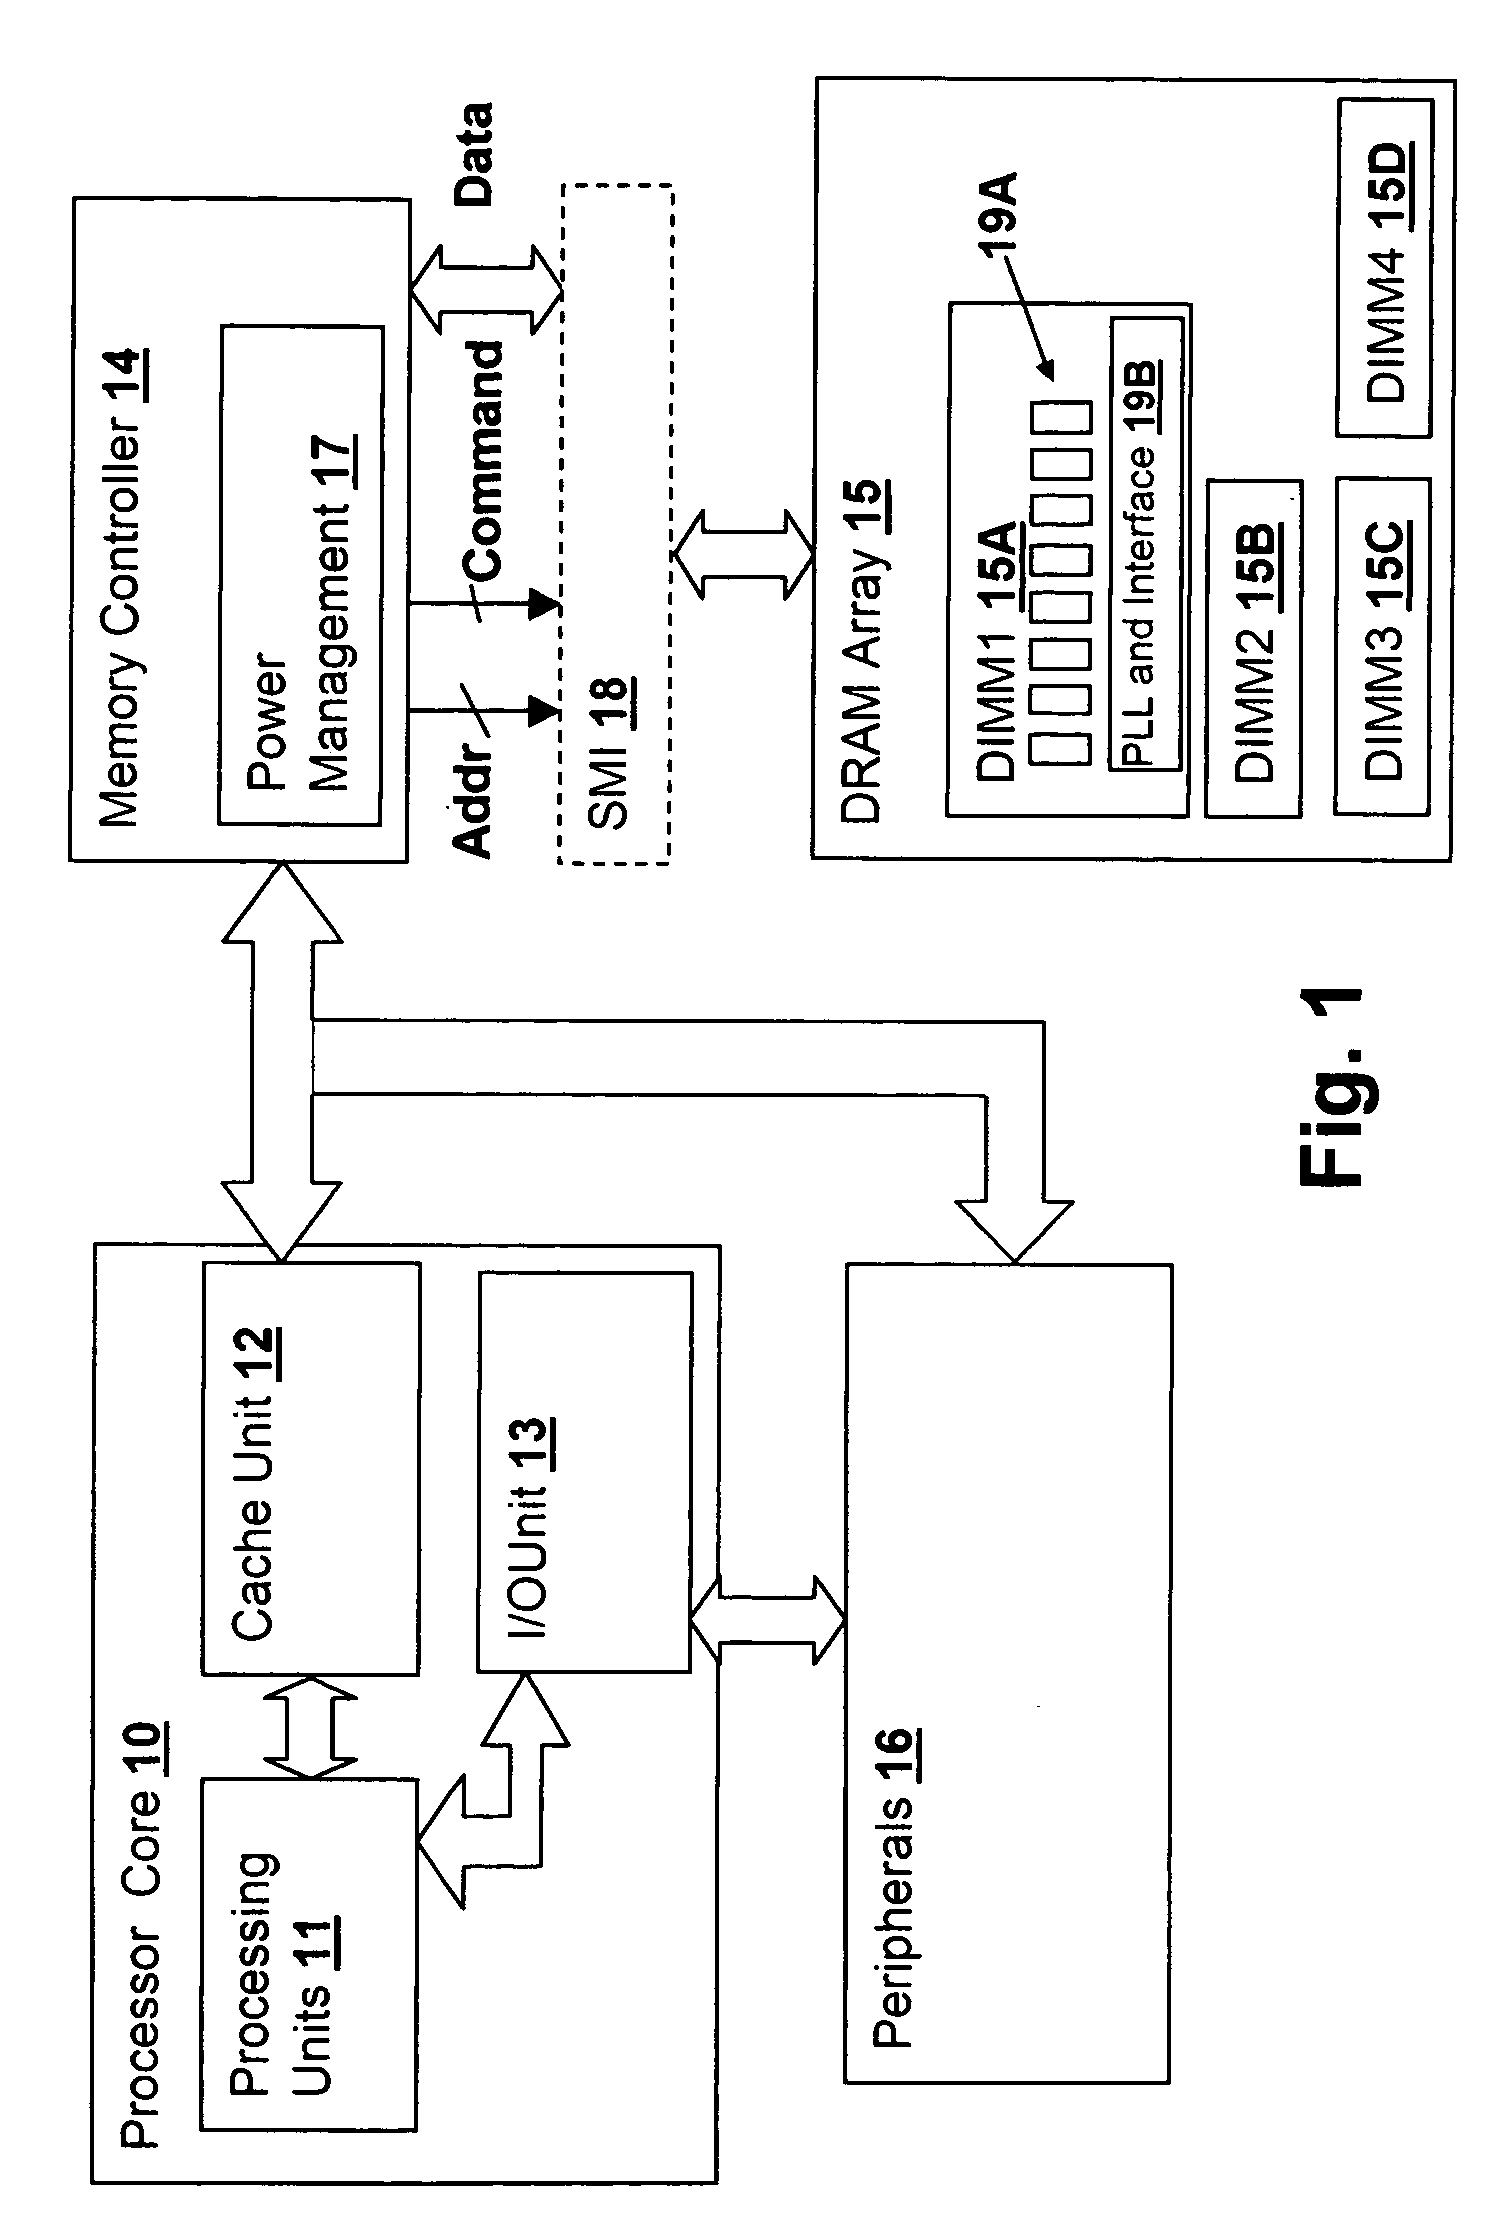 Method and system for power management including device controller-based device use evaluation and power-state control